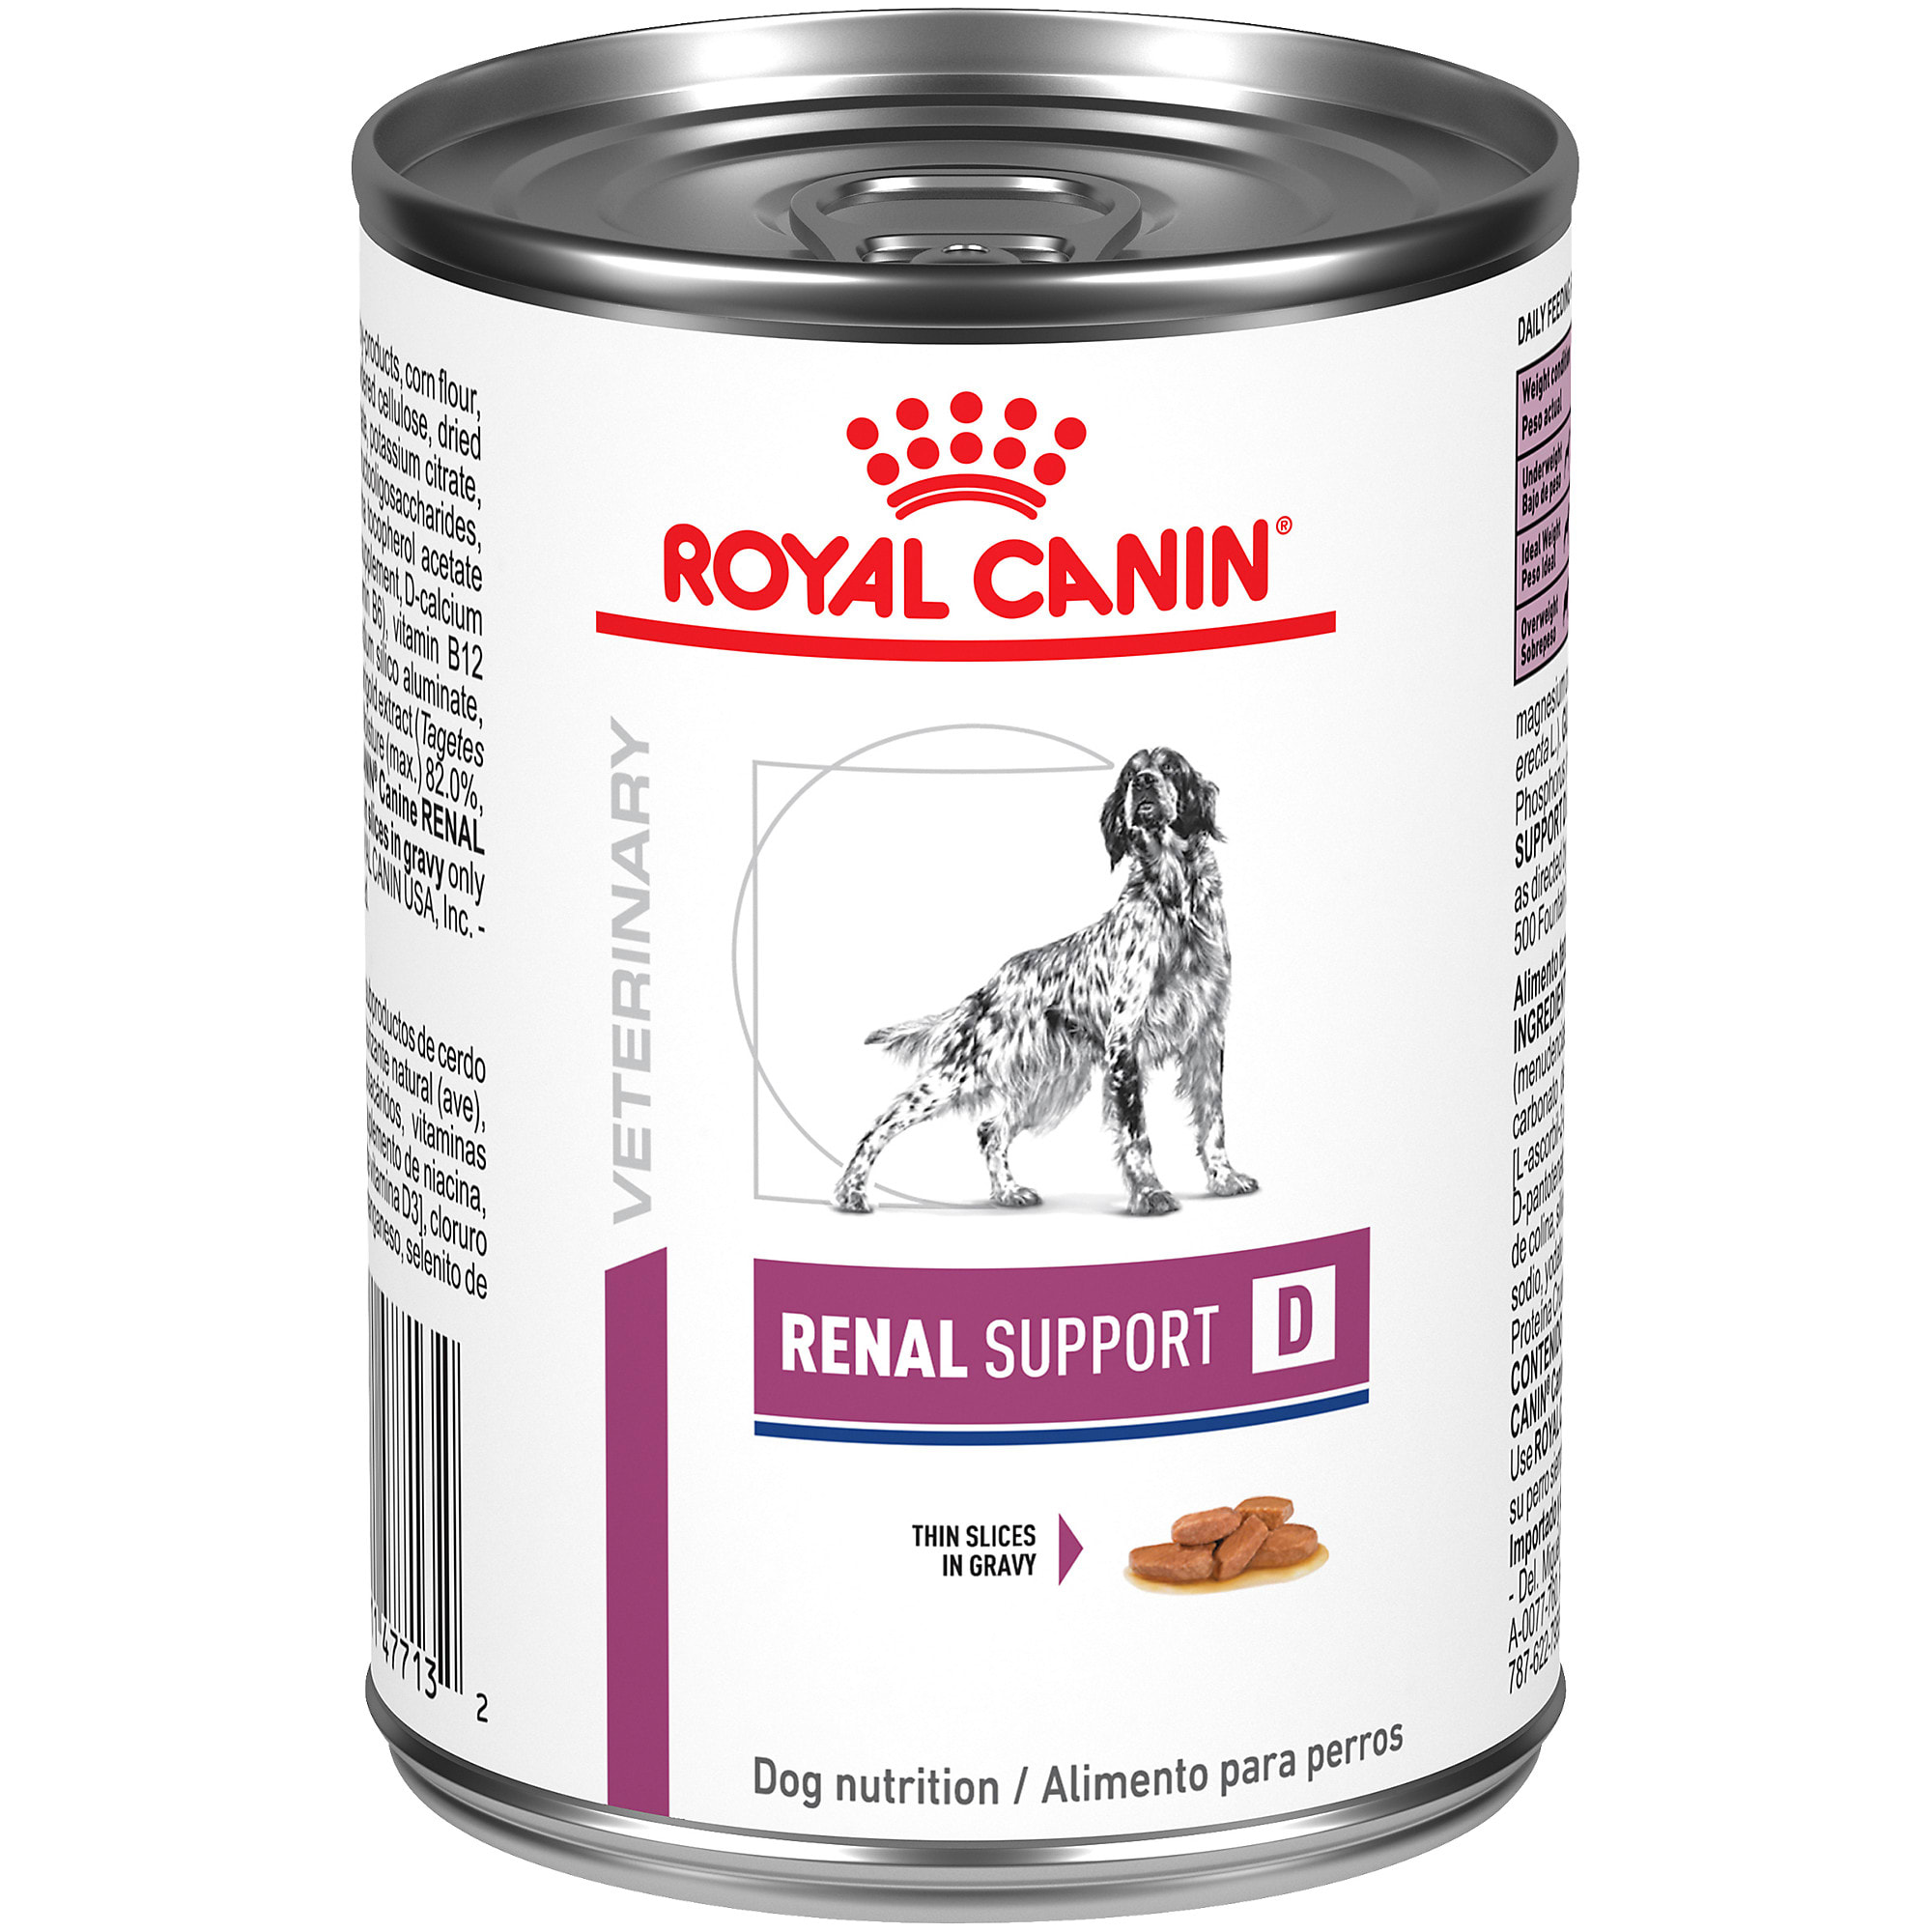 ROYAL CANIN Veterinary Diet Renal Support D Thin Slices in Gravy Canned Wet Dog Food, 13 oz., of 24 | Petco